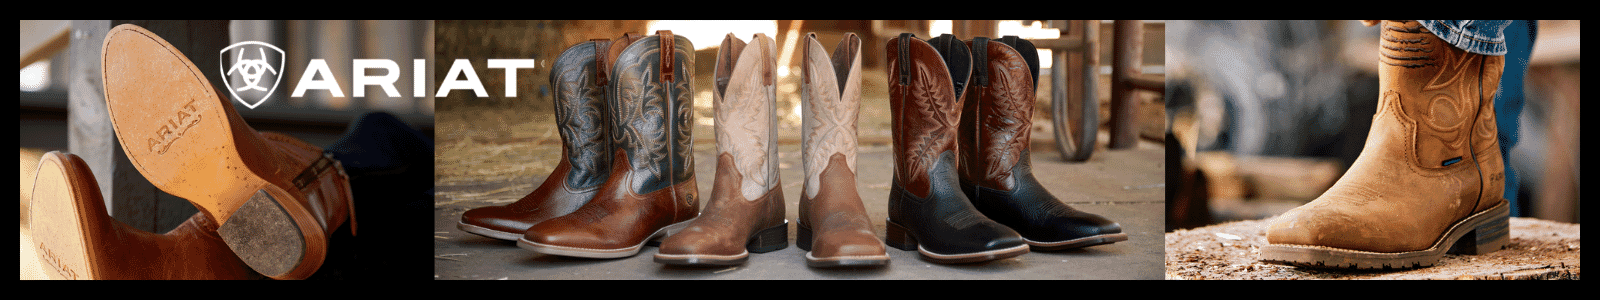 Ariat Boots and Shoes at ElliottsBoots.com